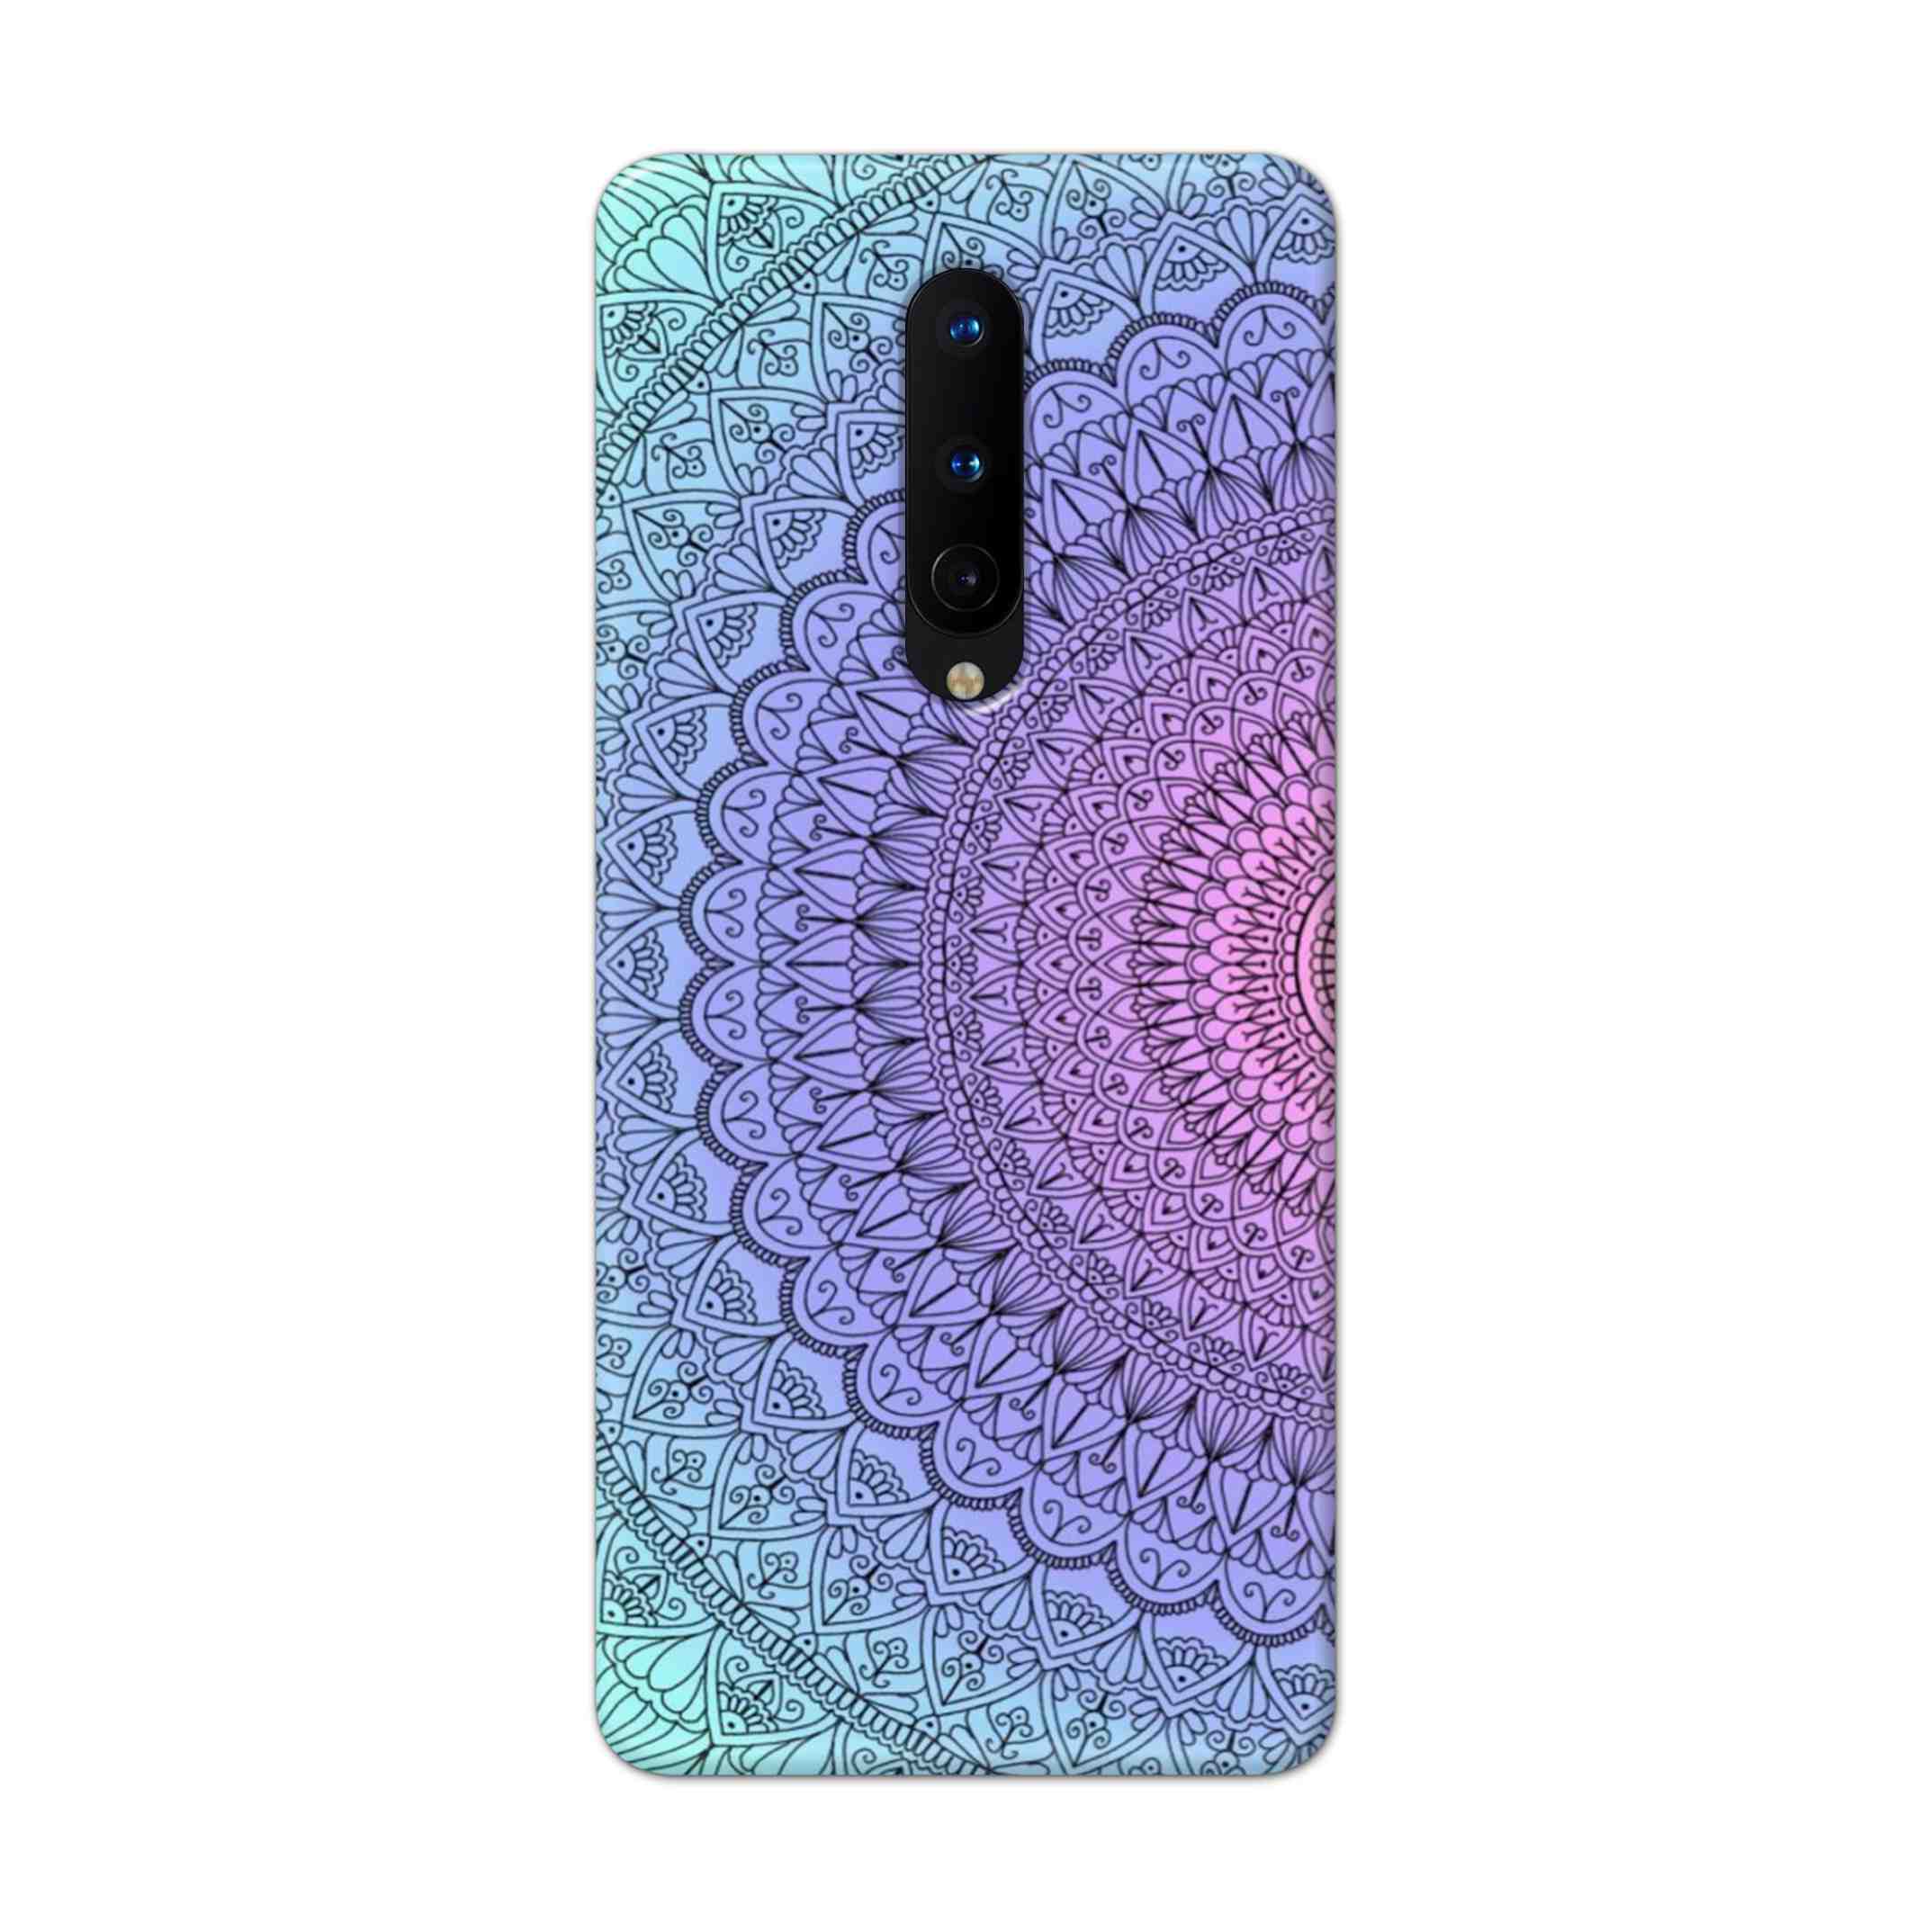 Buy Colourful Mandala Hard Back Mobile Phone Case Cover For OnePlus 8 Online